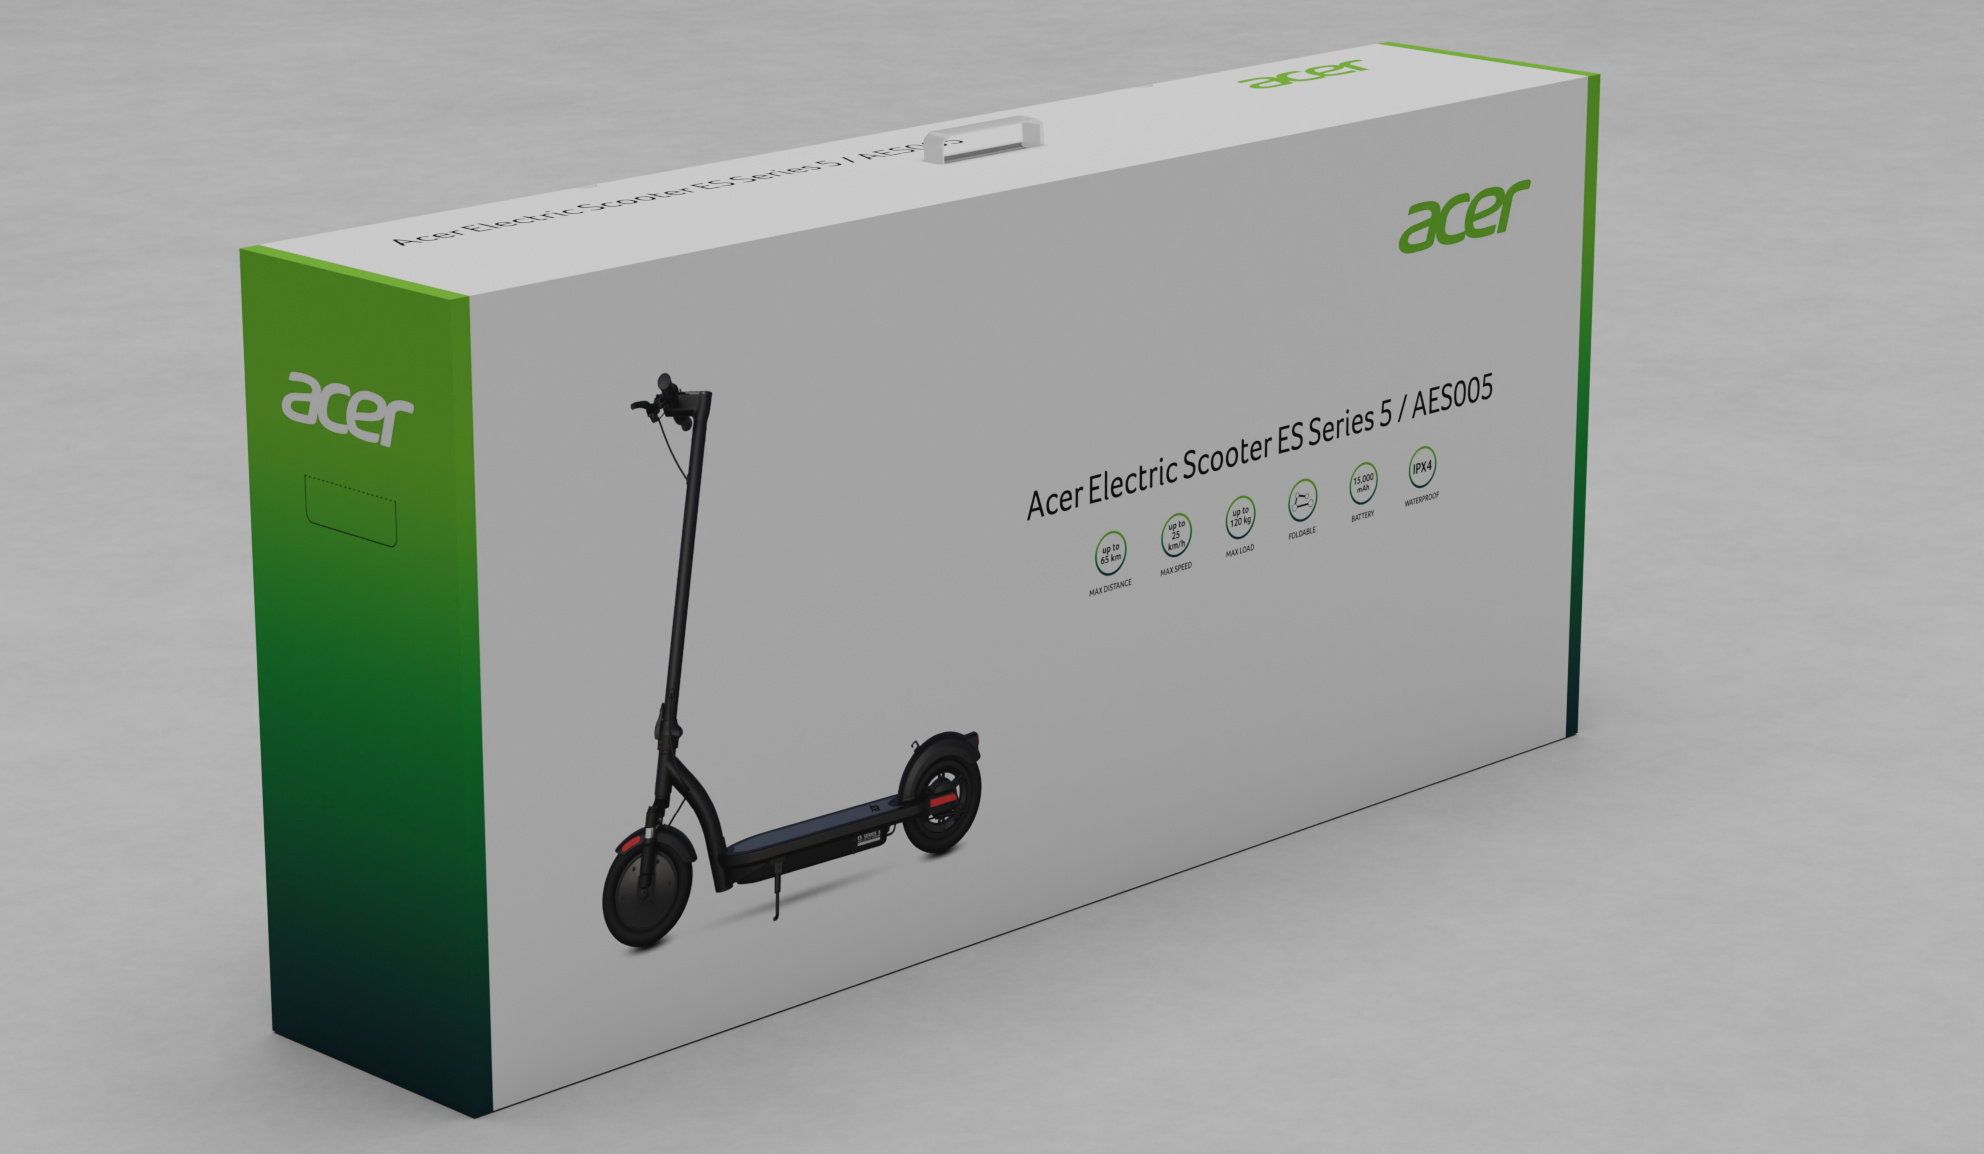 Acer scooter series 3. Электросамокат Acer. Электросамокат Acer 5. Электросамокат Hoverbot BS-02. Электросамокат Acer aes001.